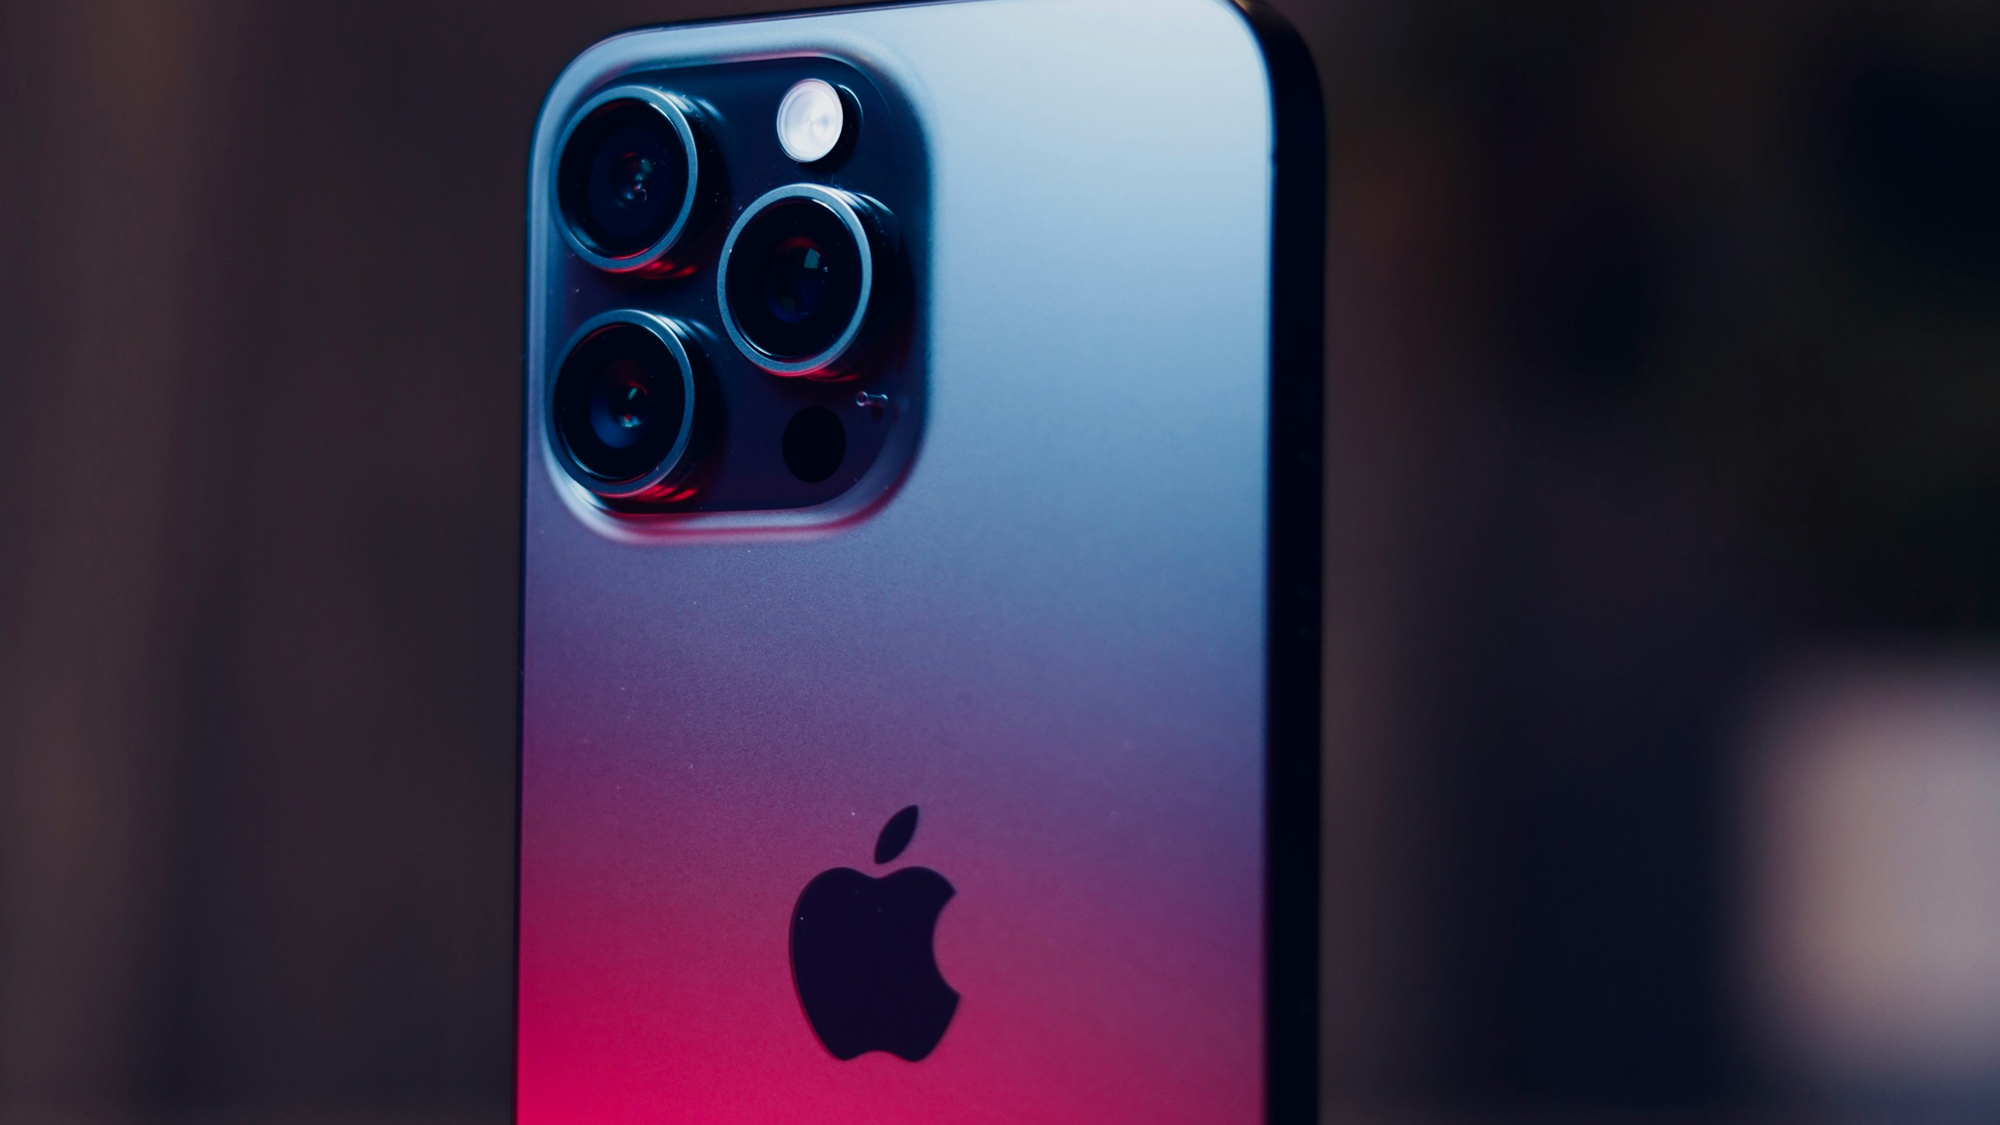 the back of an iphone with the camera showing